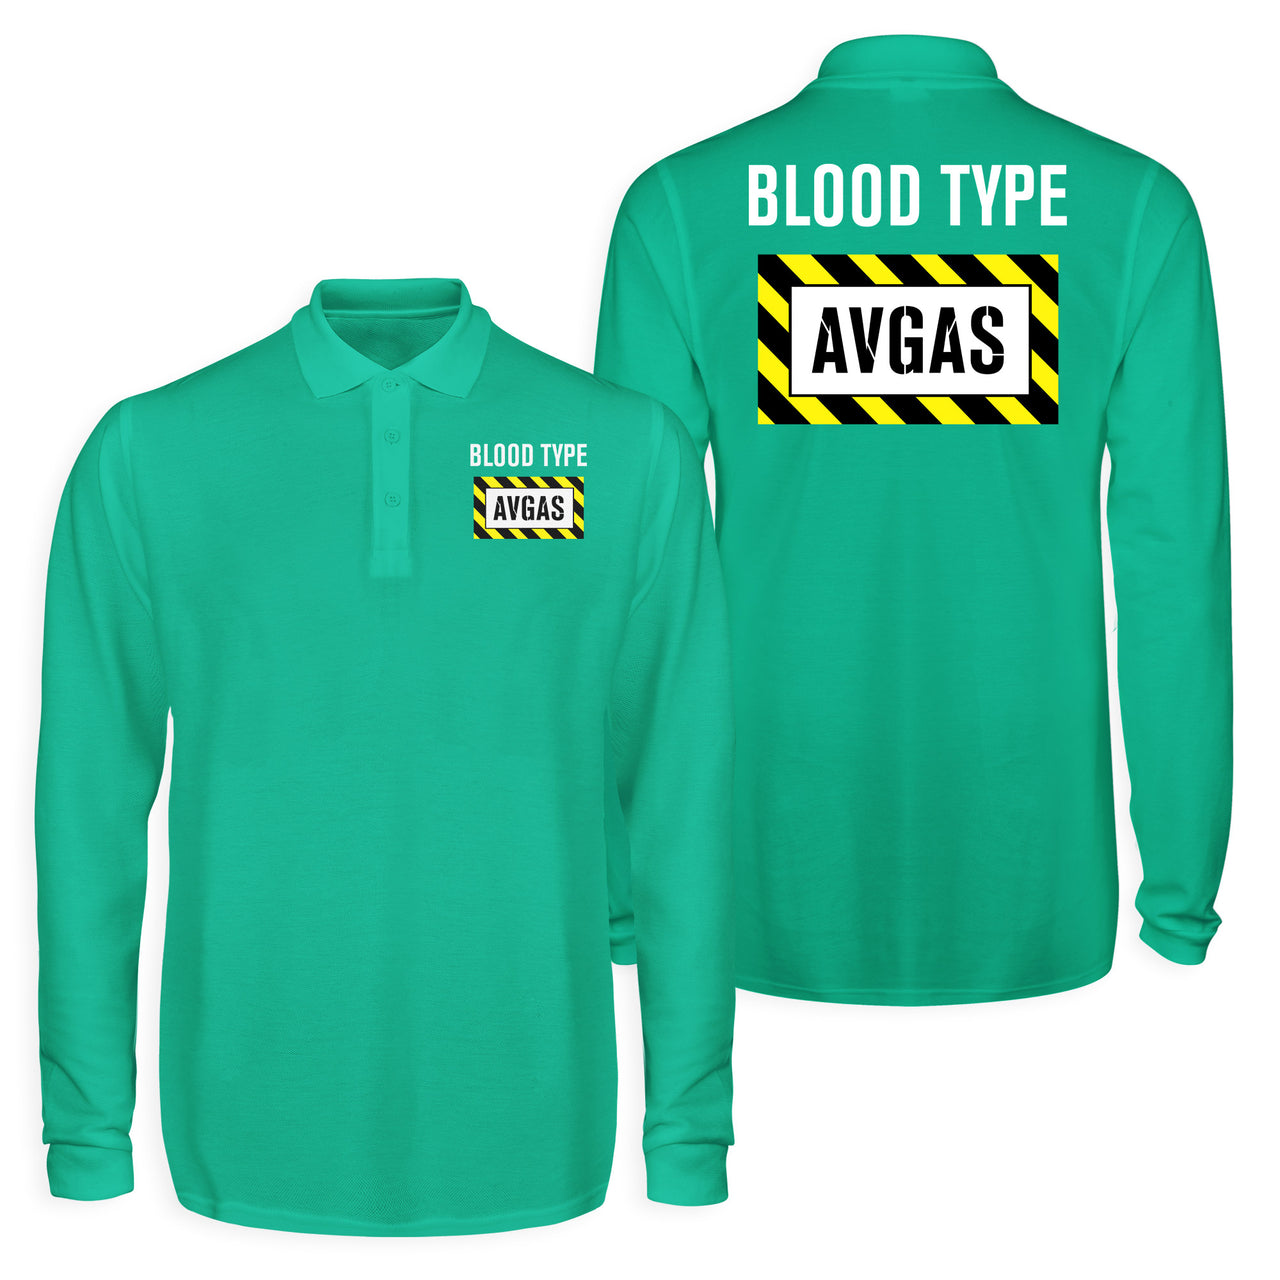 Blood Type AVGAS Designed Long Sleeve Polo T-Shirts (Double-Side)